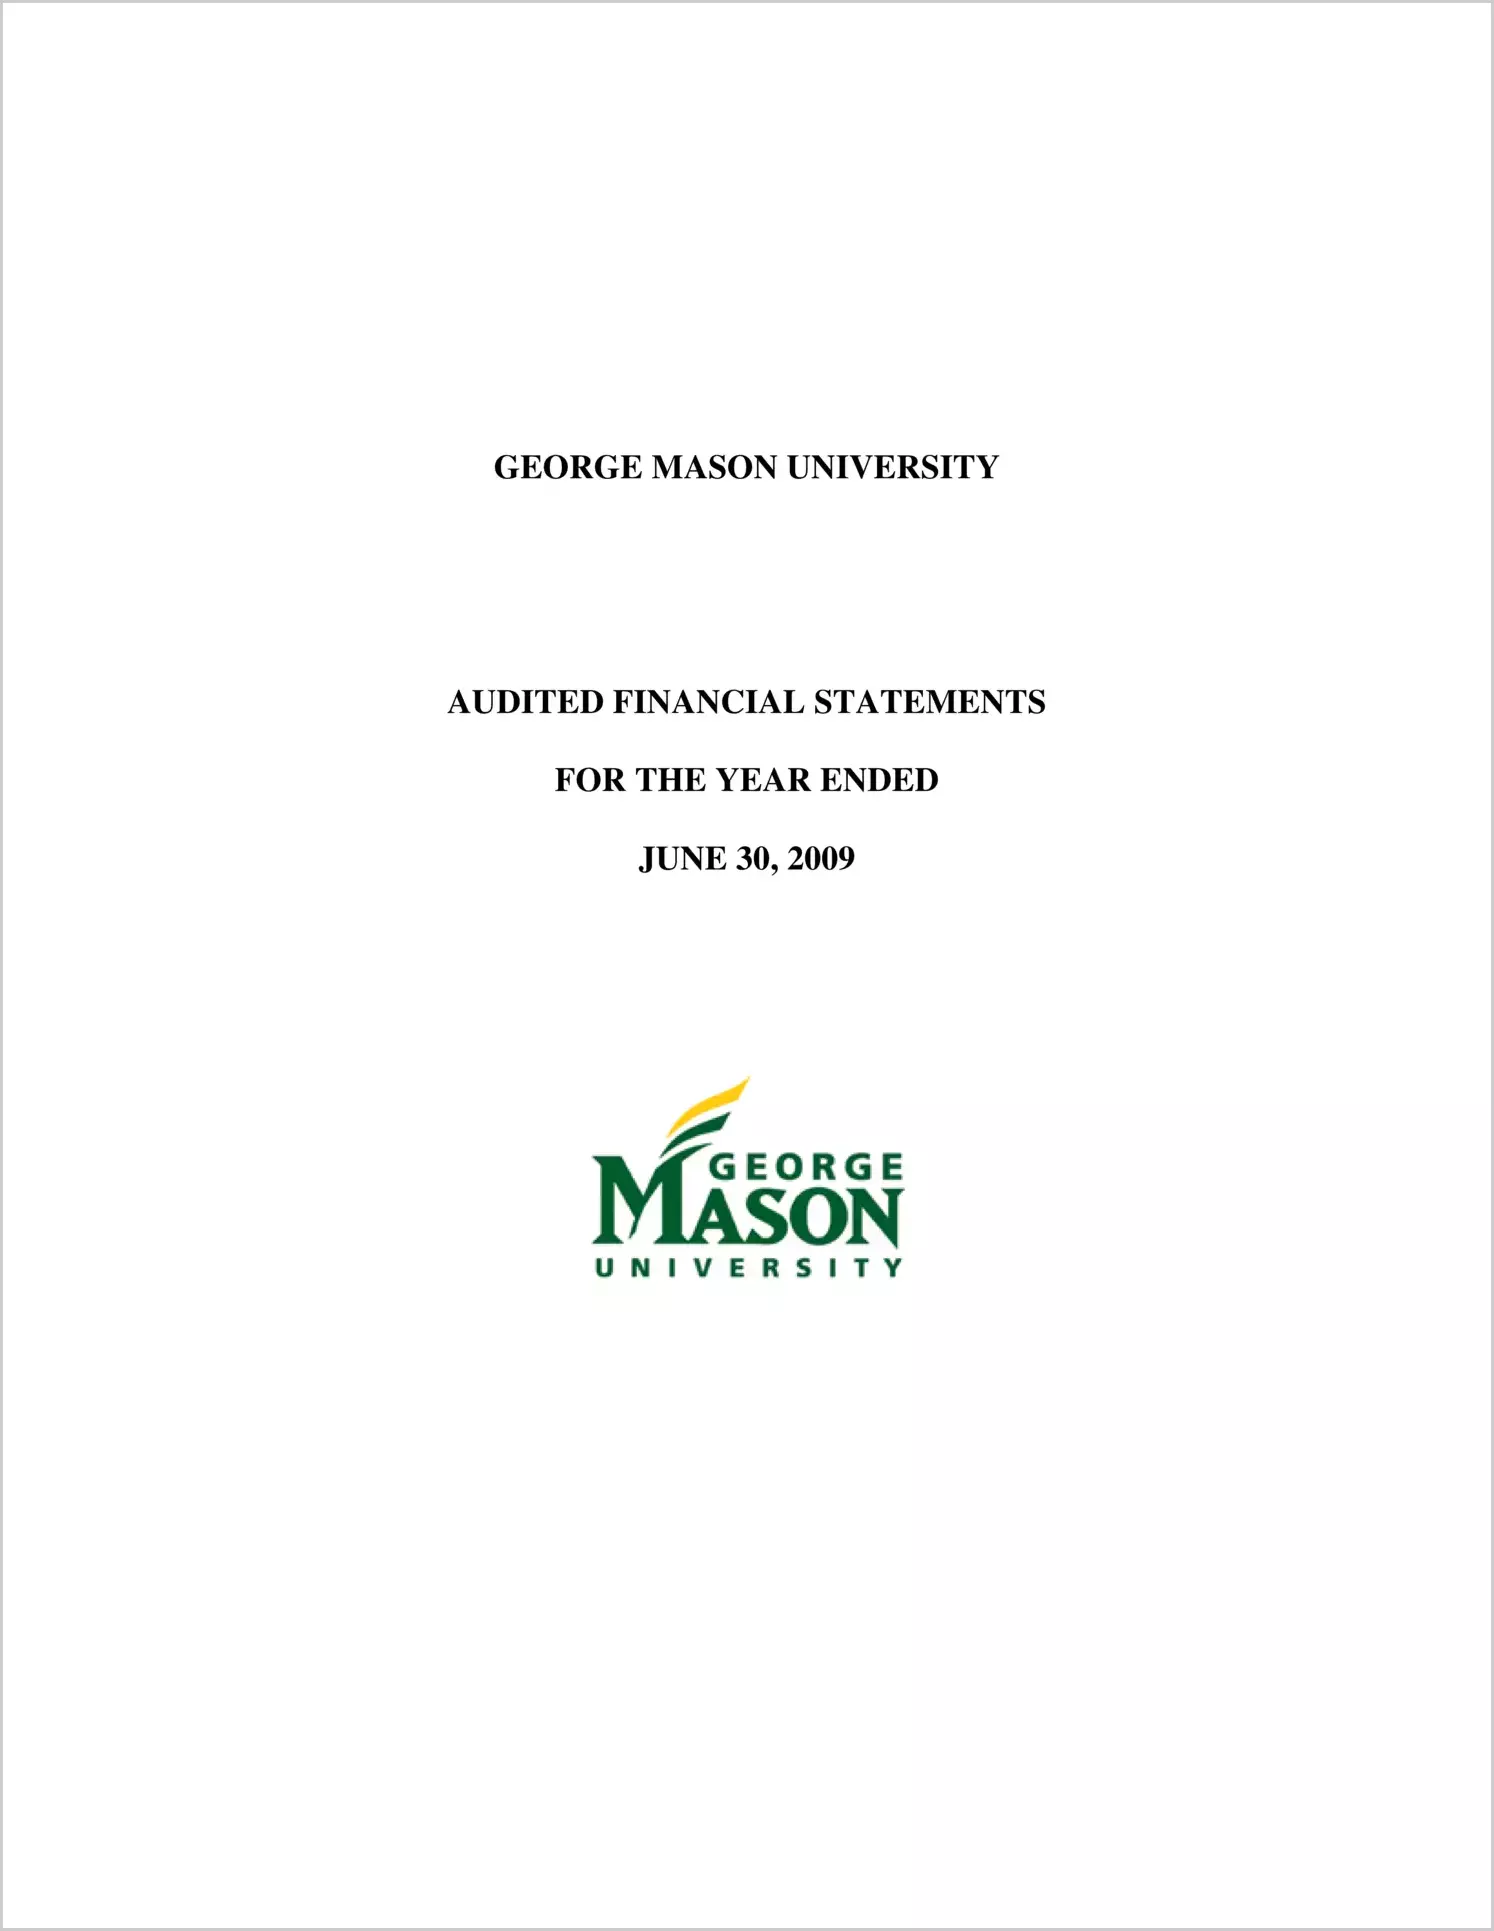 George Mason University Financial Statements for the year ended June 30, 2009